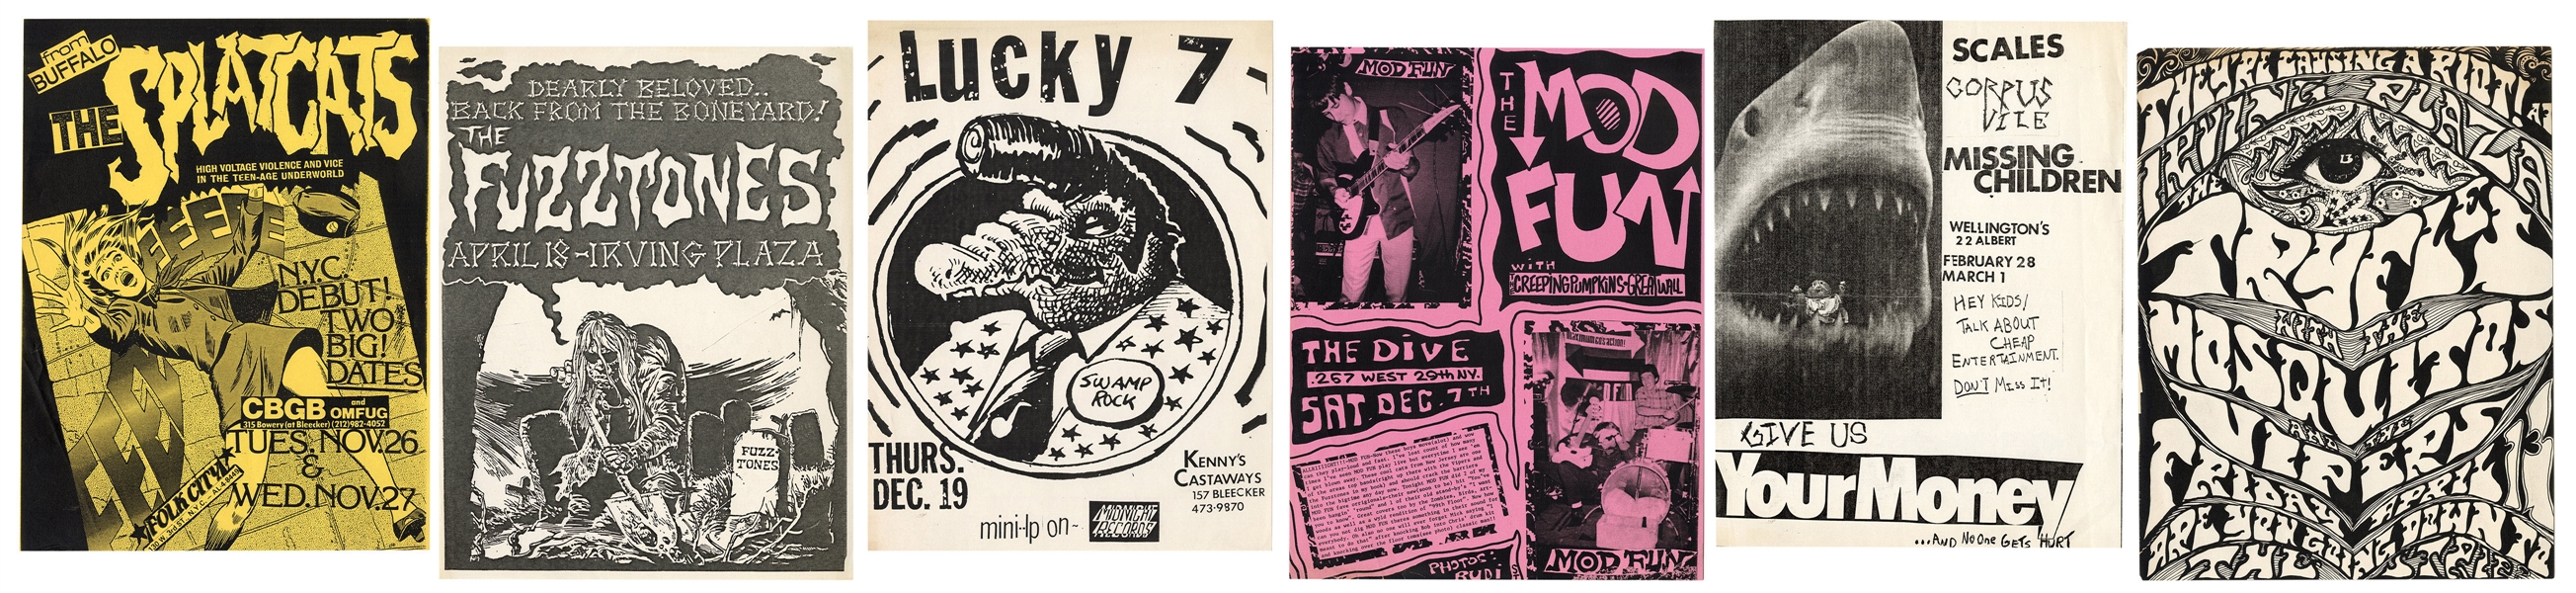  [MUSIC]. Collection of Punk and Garage Rock Flyers and Hand...